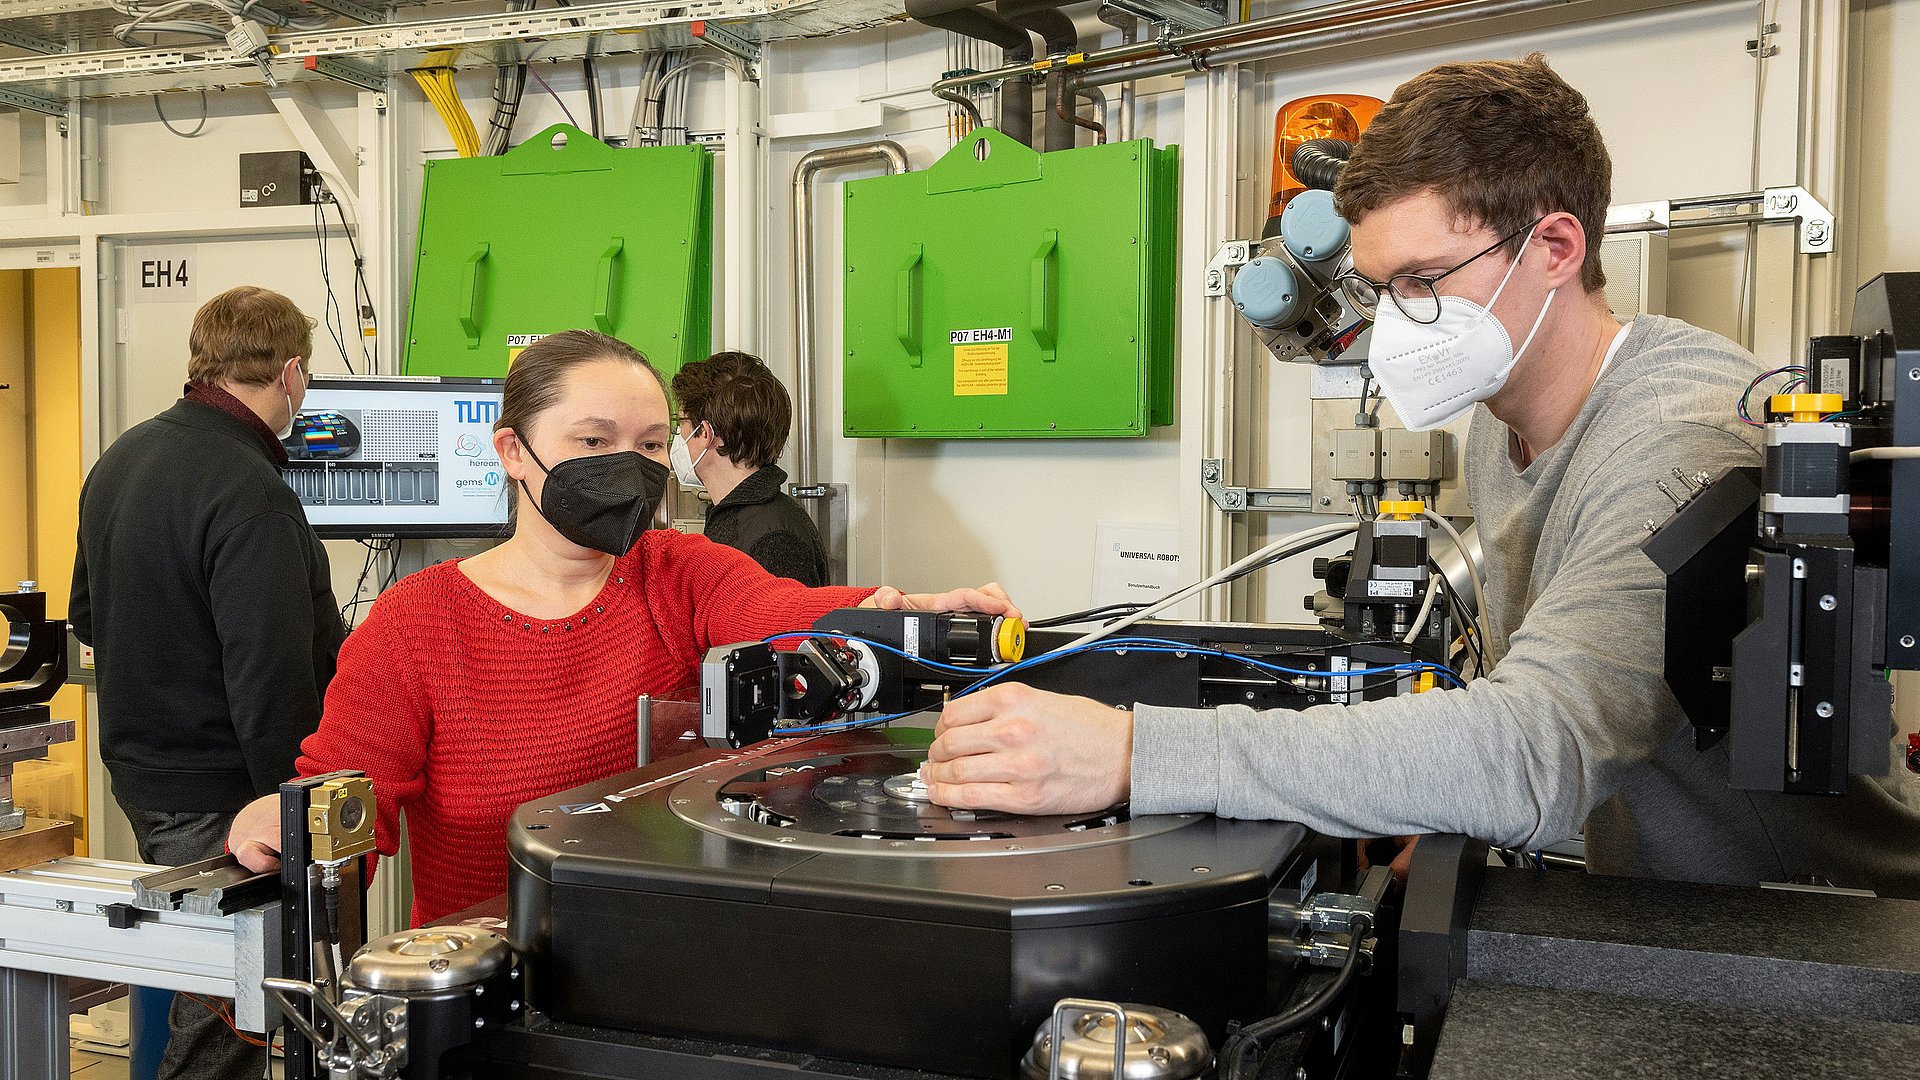 Julia Herzen (front left), Professor of Biomedical Imaging Physics at TUM, working together with her team at the micro-computed tomography scanner.